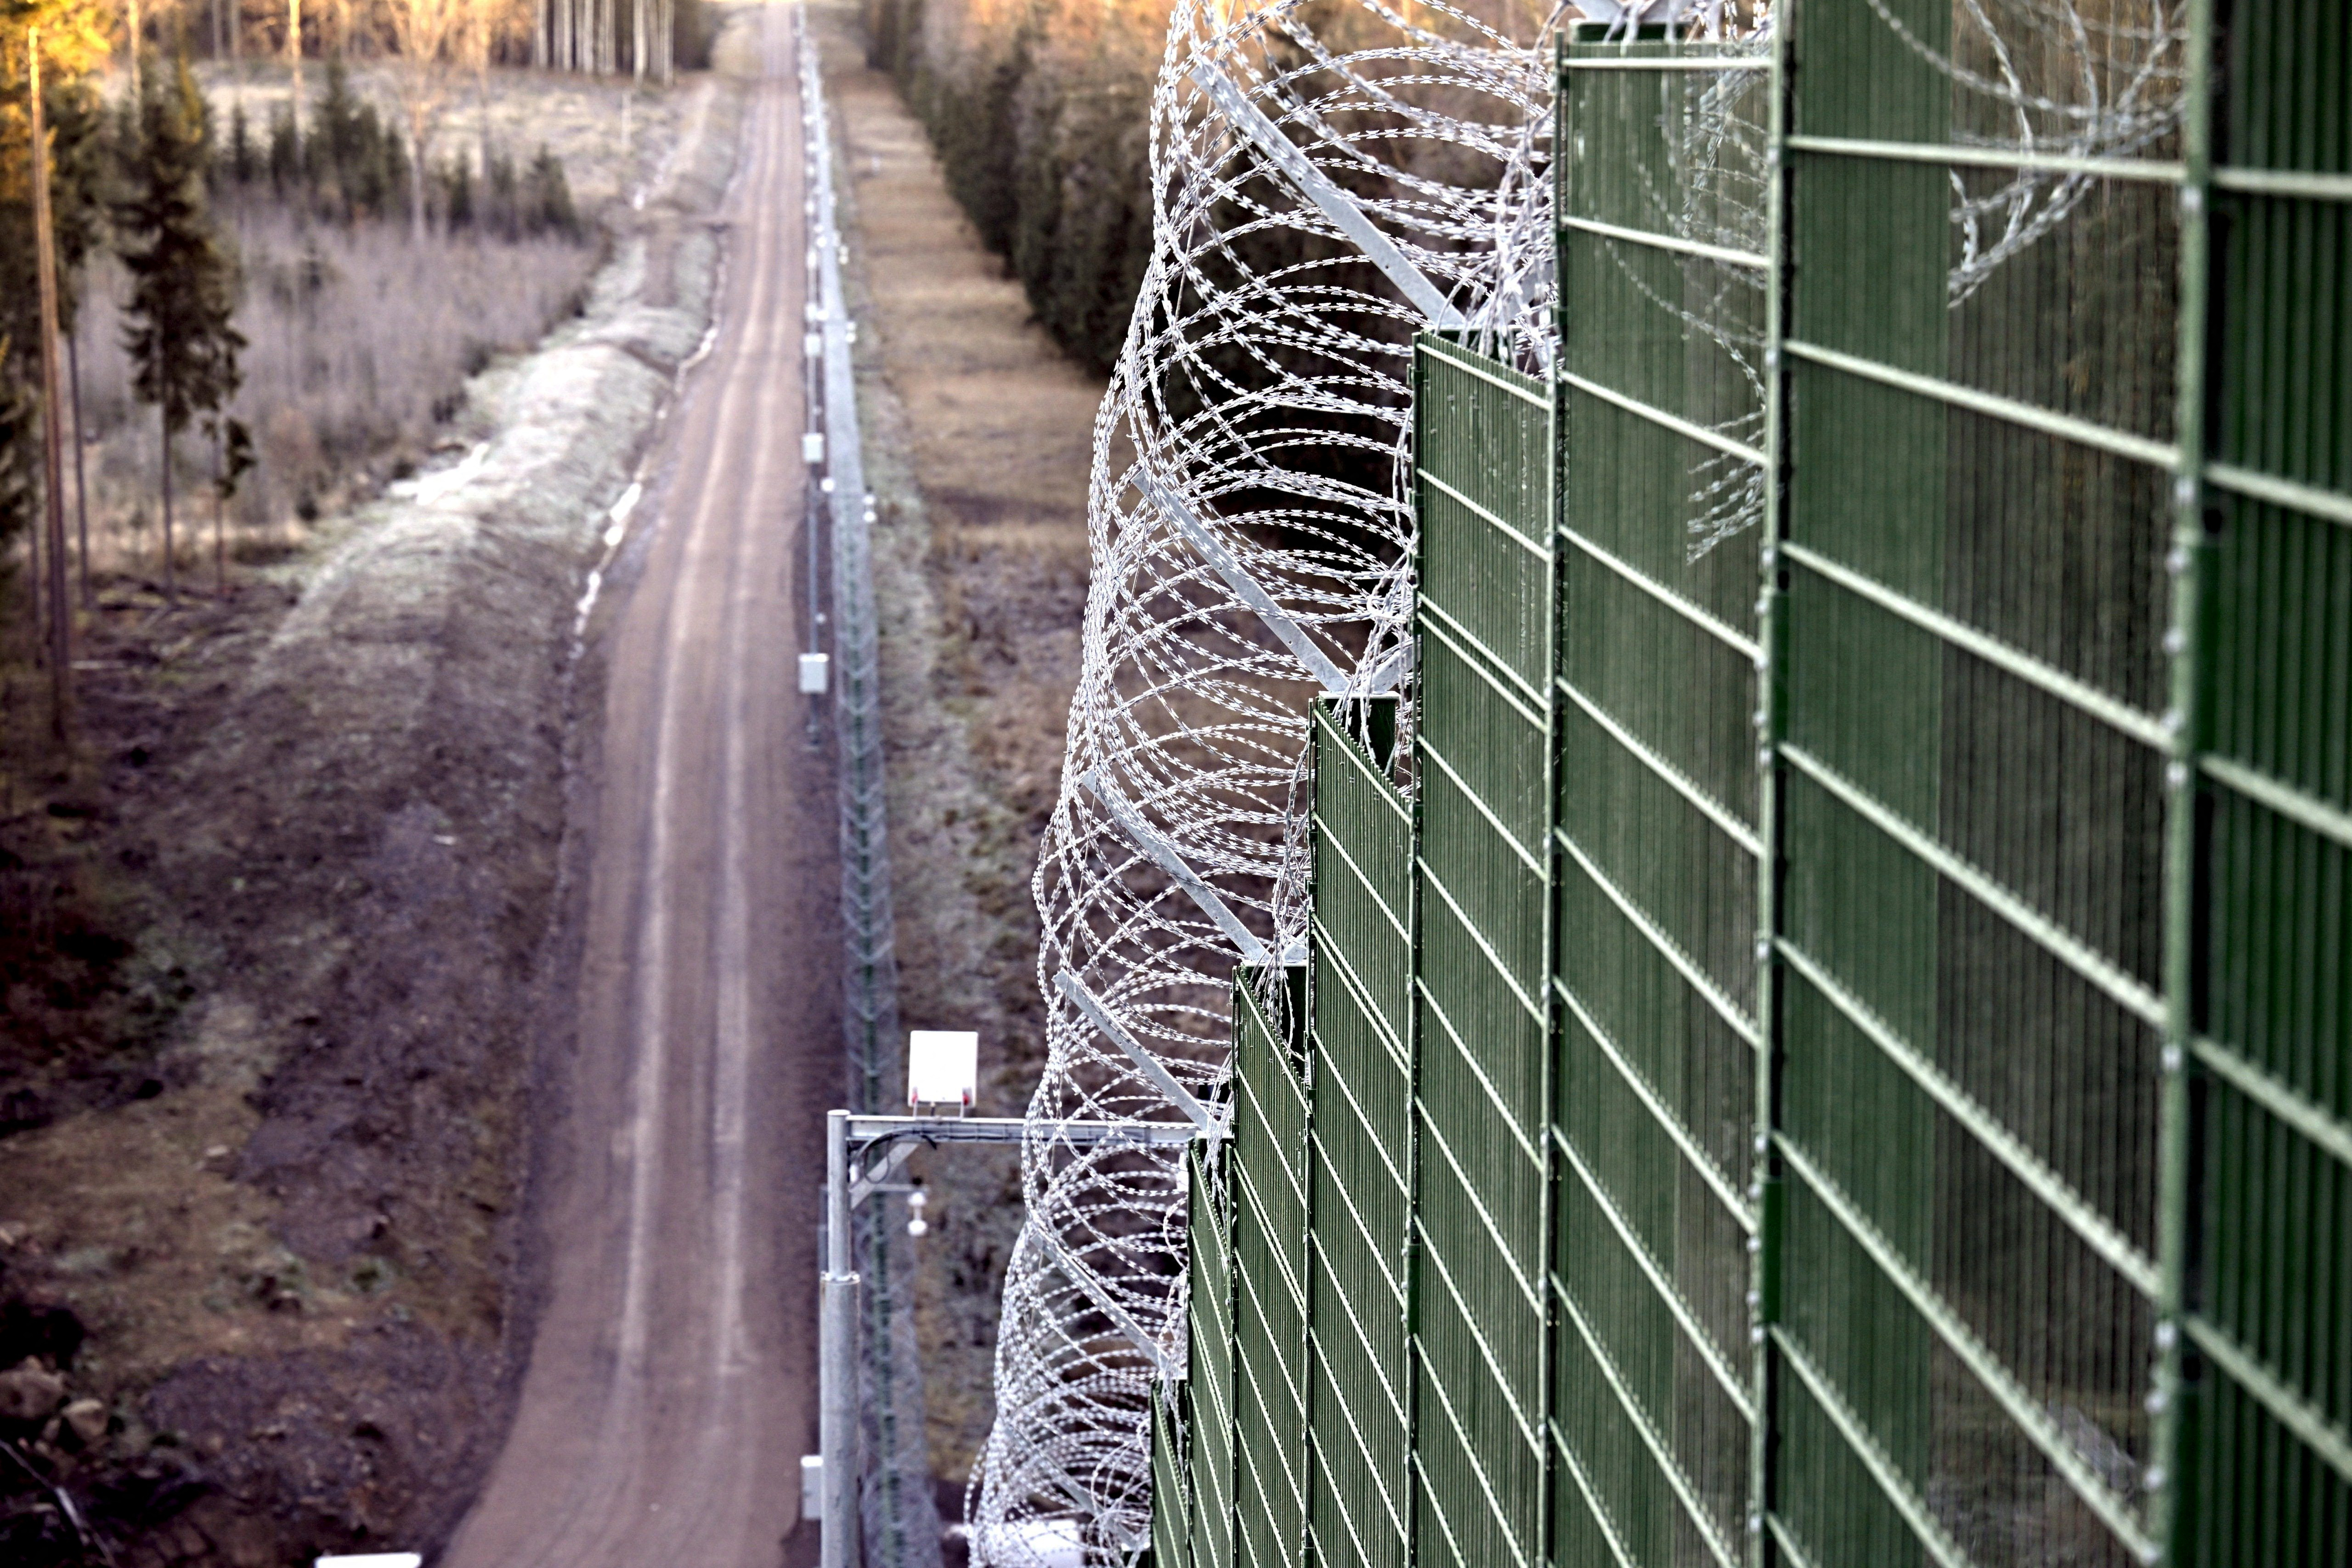 A view of the pilot border fence of the Finnish Border Guard at the Finnish-Russian border in Imatra